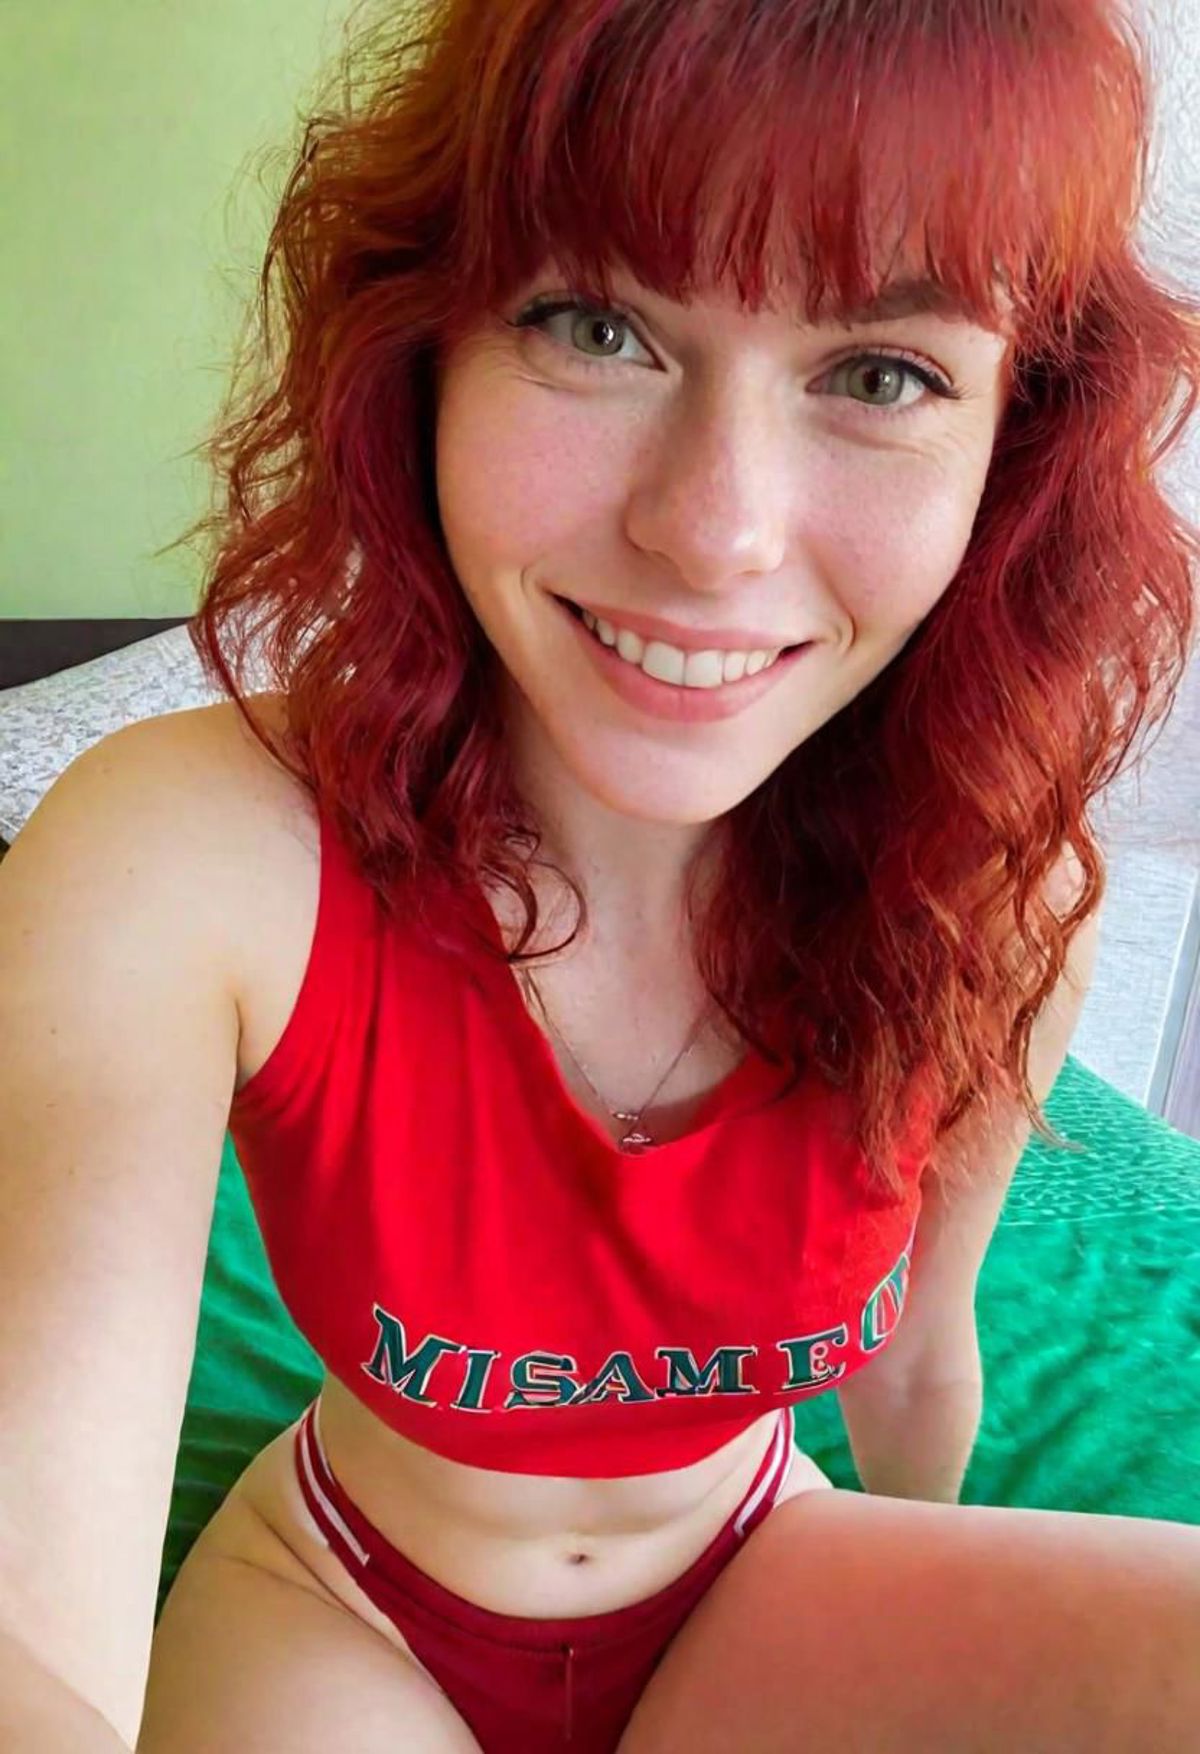 A young woman wearing a red shirt and underwear, smiling for the camera.